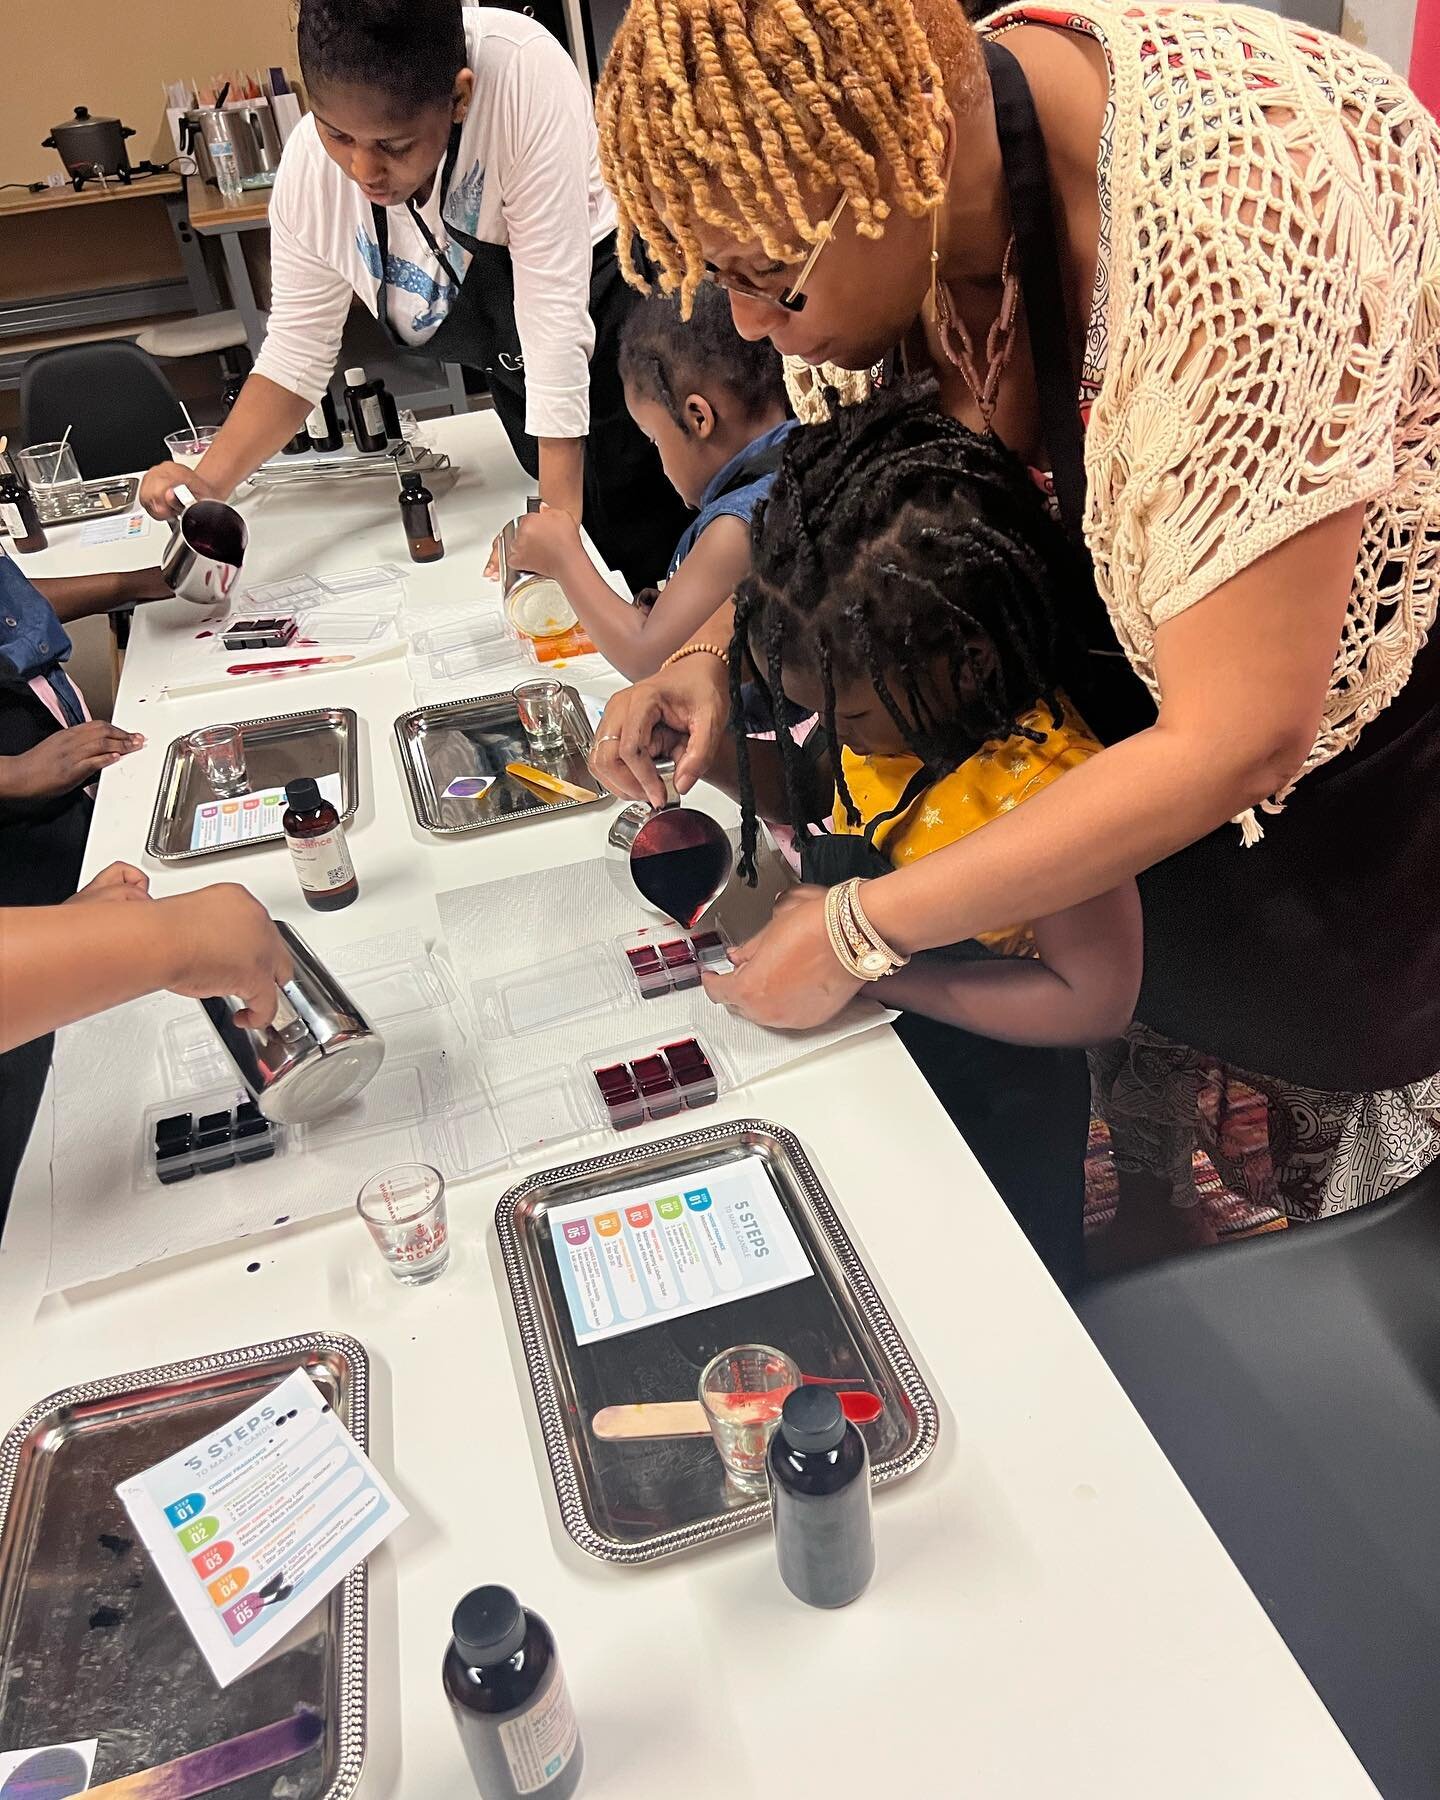 Fun Summer ☀️ Activities for the kids:
Kids Candle Class. Children are provided the options to create wax melts while adults create a 10oz candle
.
.
.
.

#candles #thingstodoinatlanta #scentedcandles #thingstodoatl #atlantacandles
#thingstodoinatl #